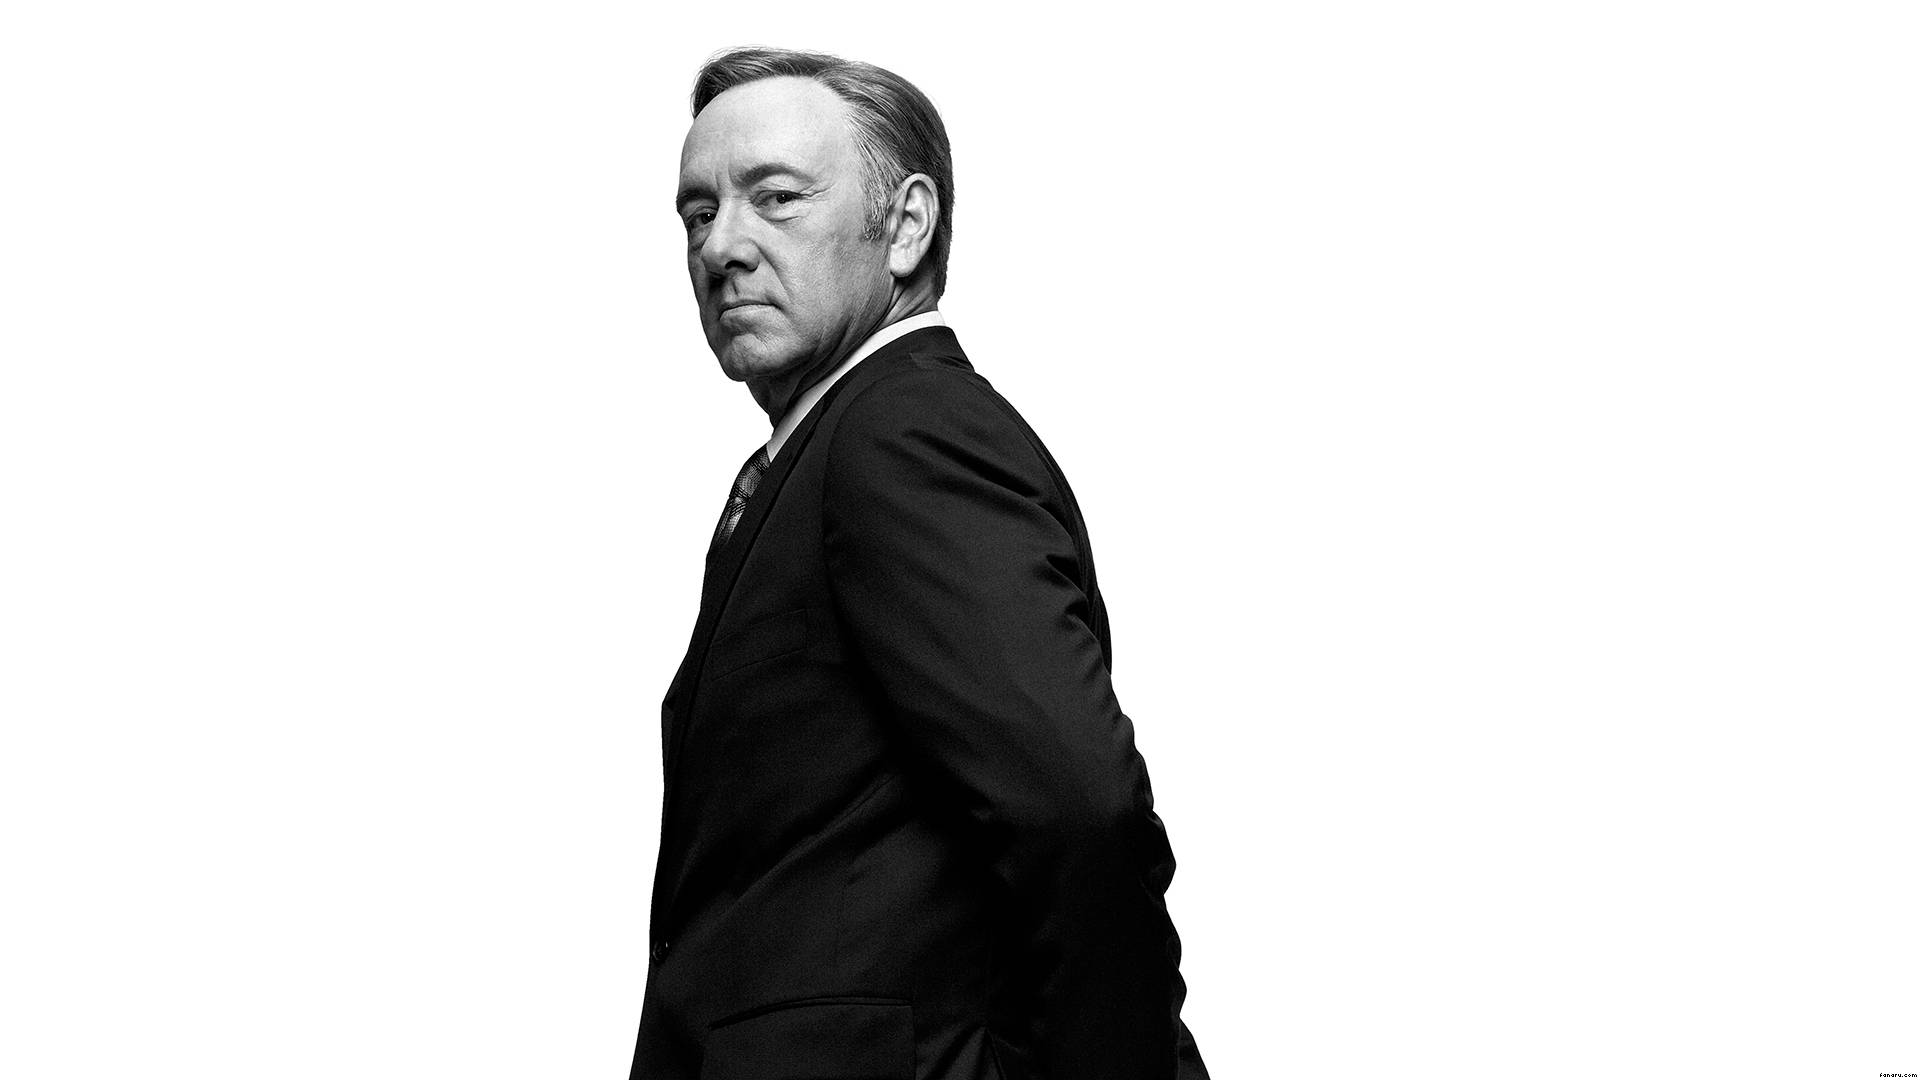 Kevin Spacey Bw House Of Cards HD Wallpaper Jpg